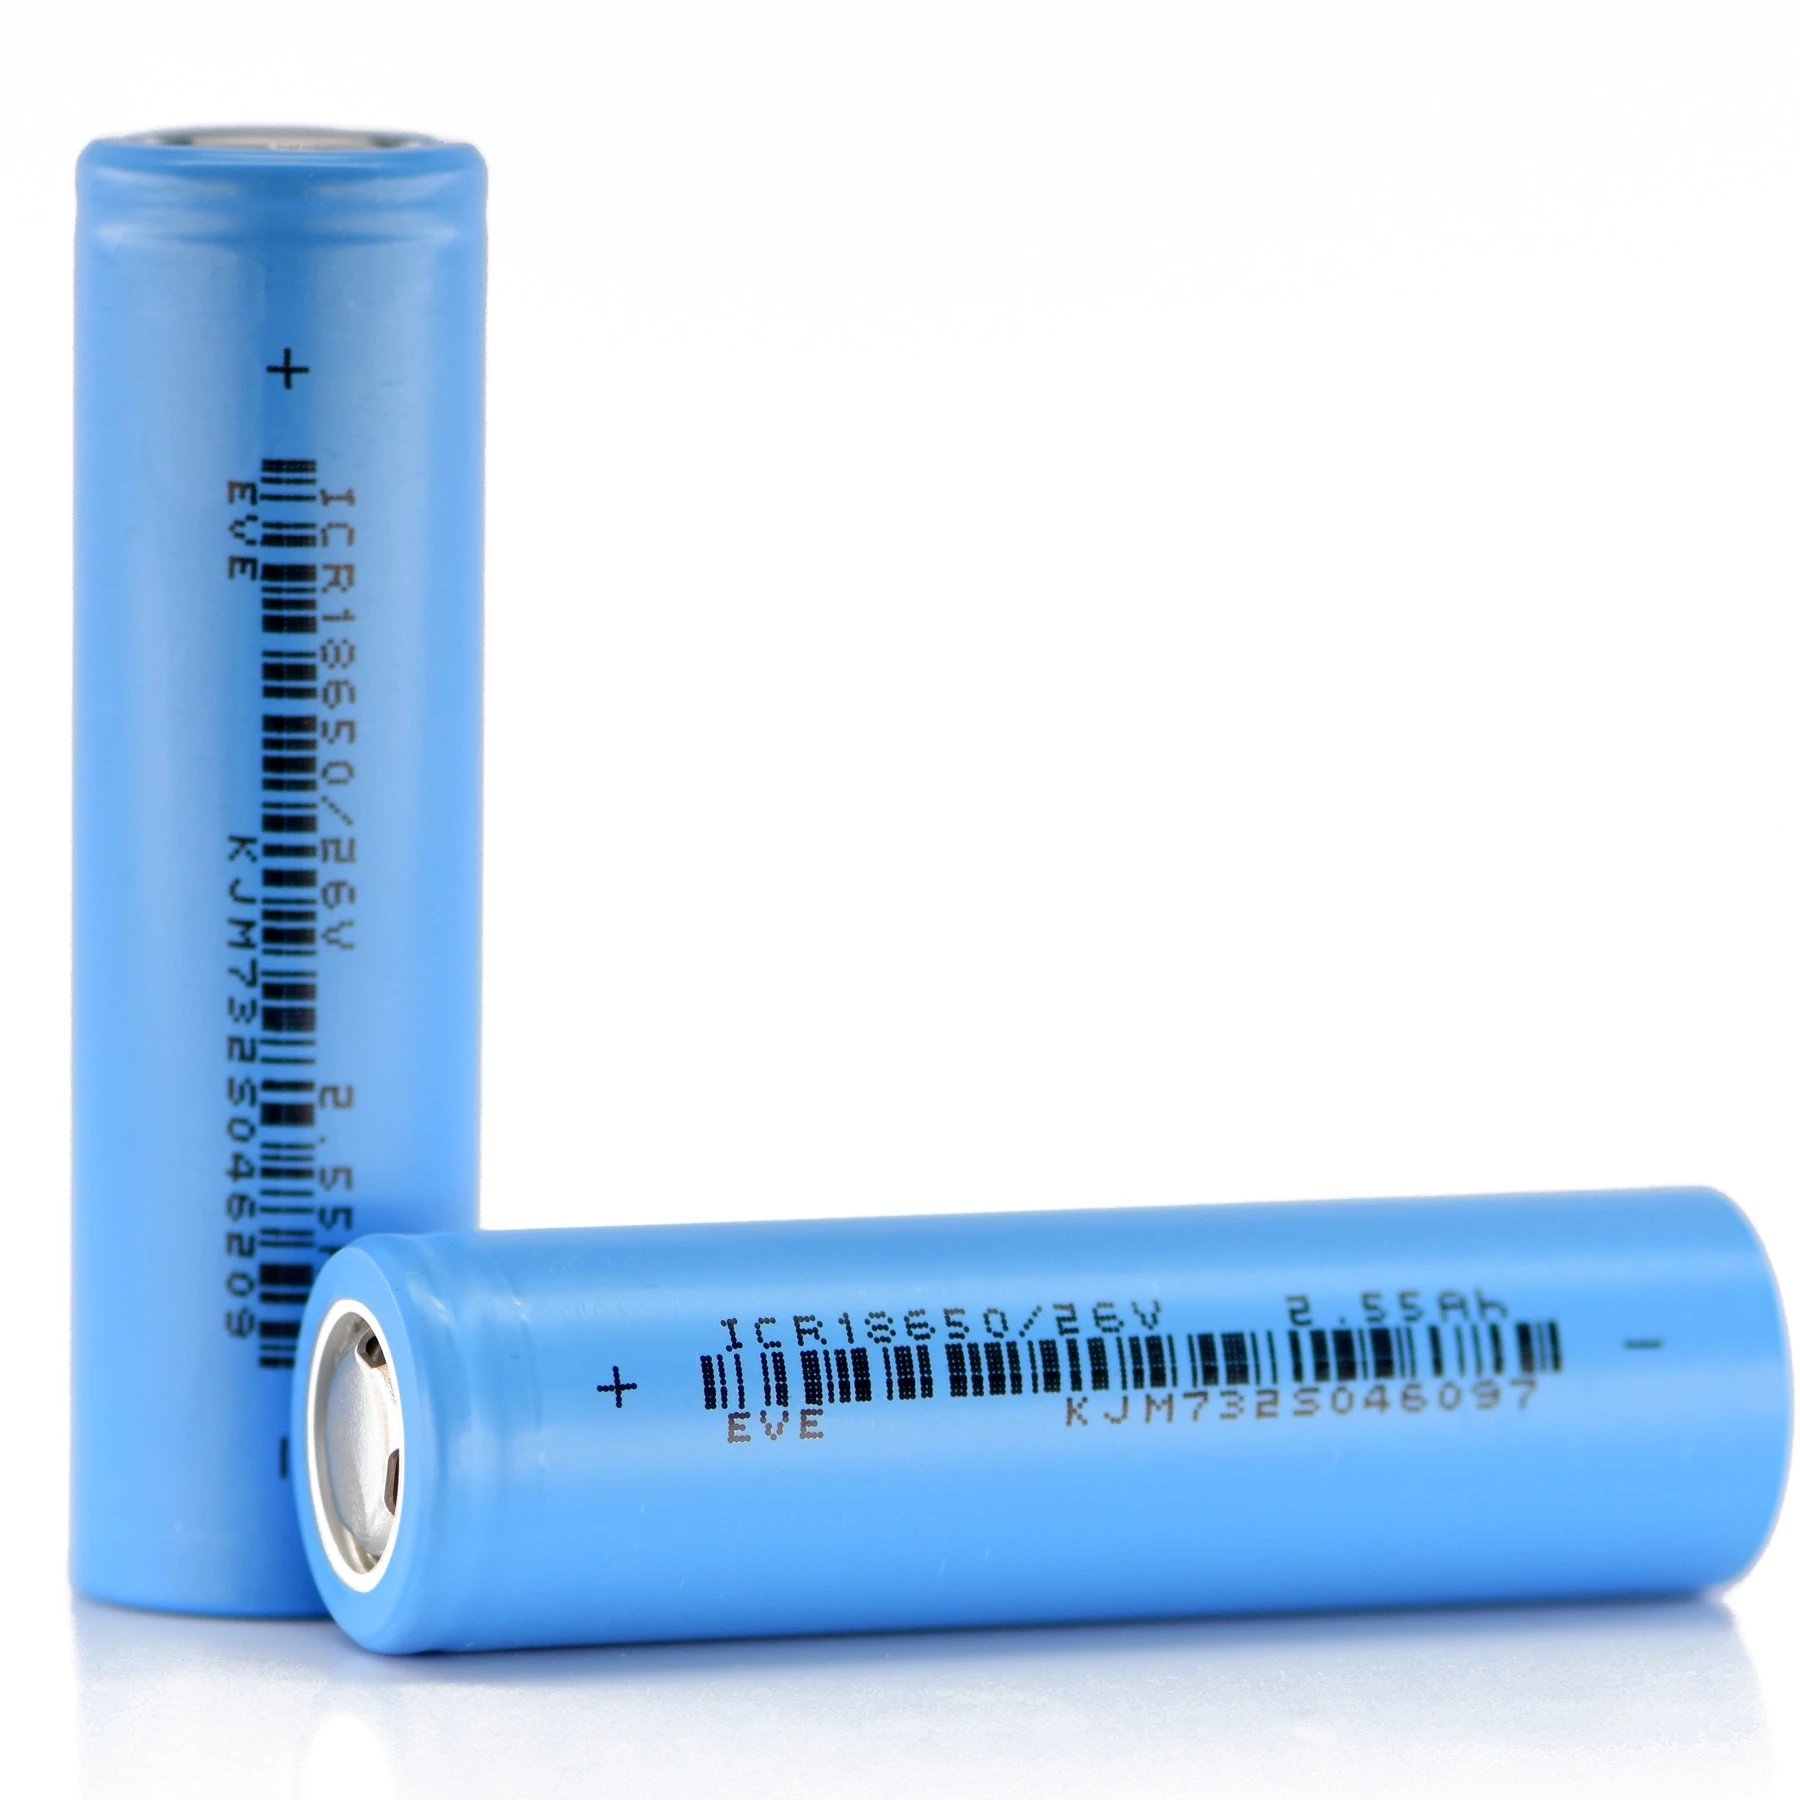 18650 Lithium Cell EVE ICR18650/26V 2550mAh 7.5A – Flat Top 4